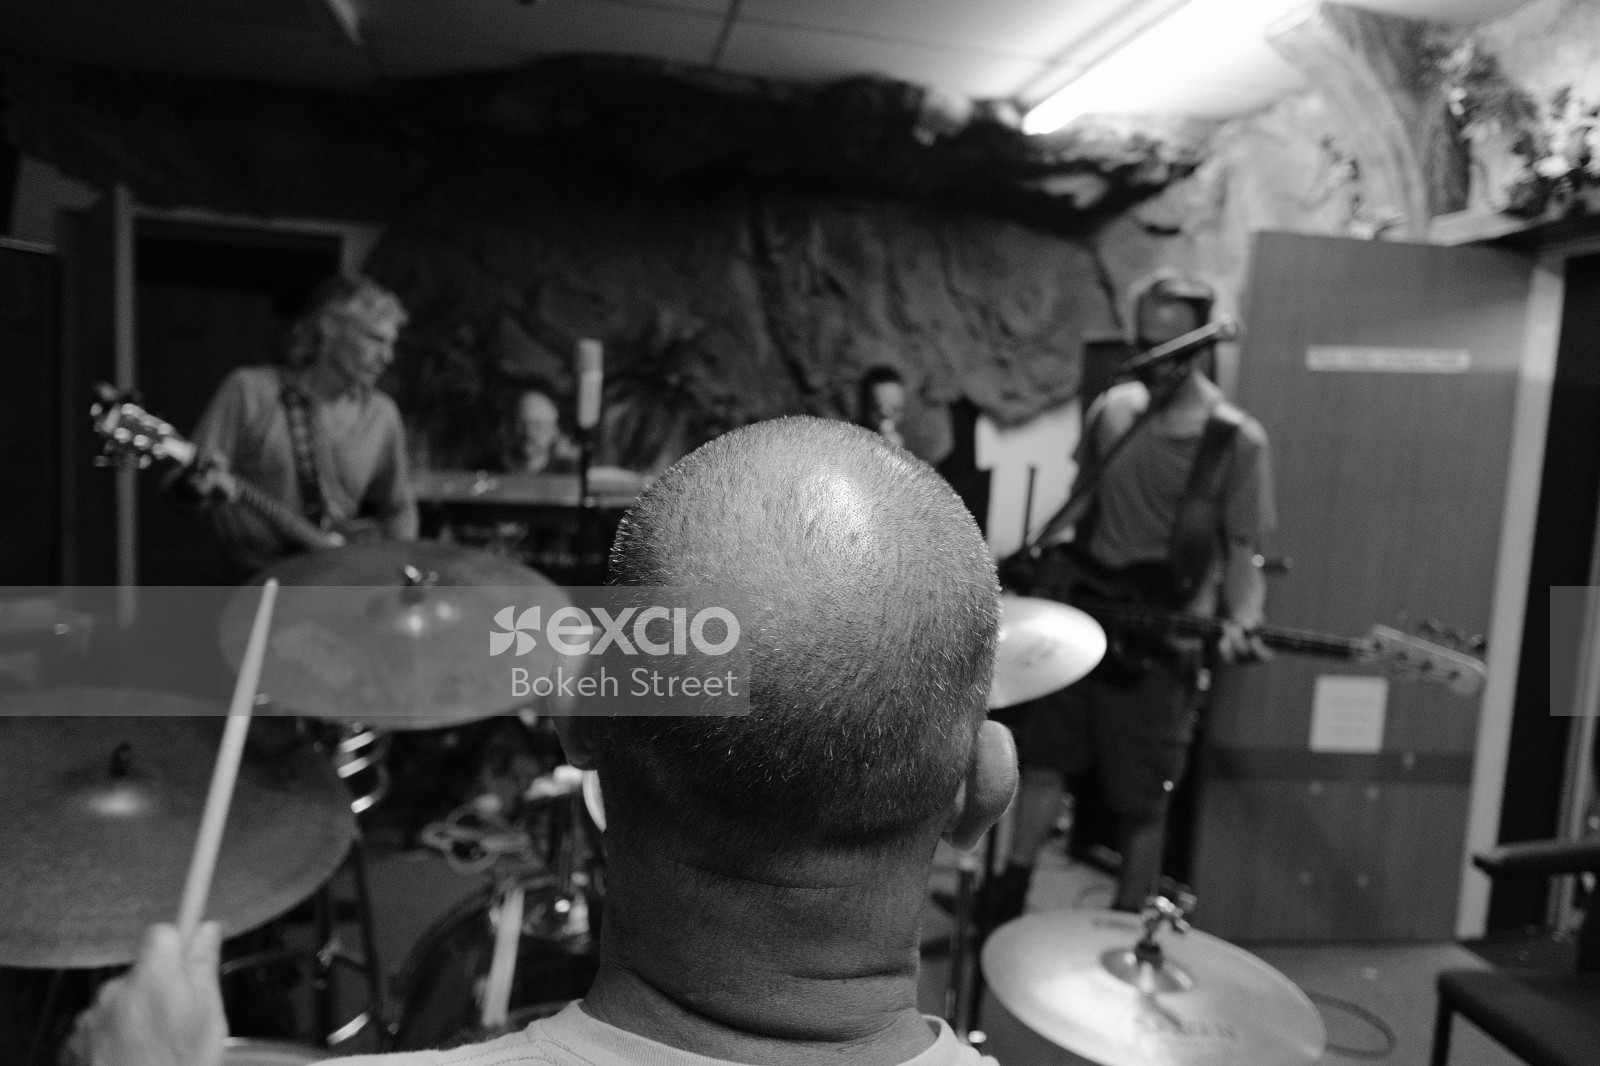 Drummer's view of the practice of "Vietnam" band monochrome bokeh